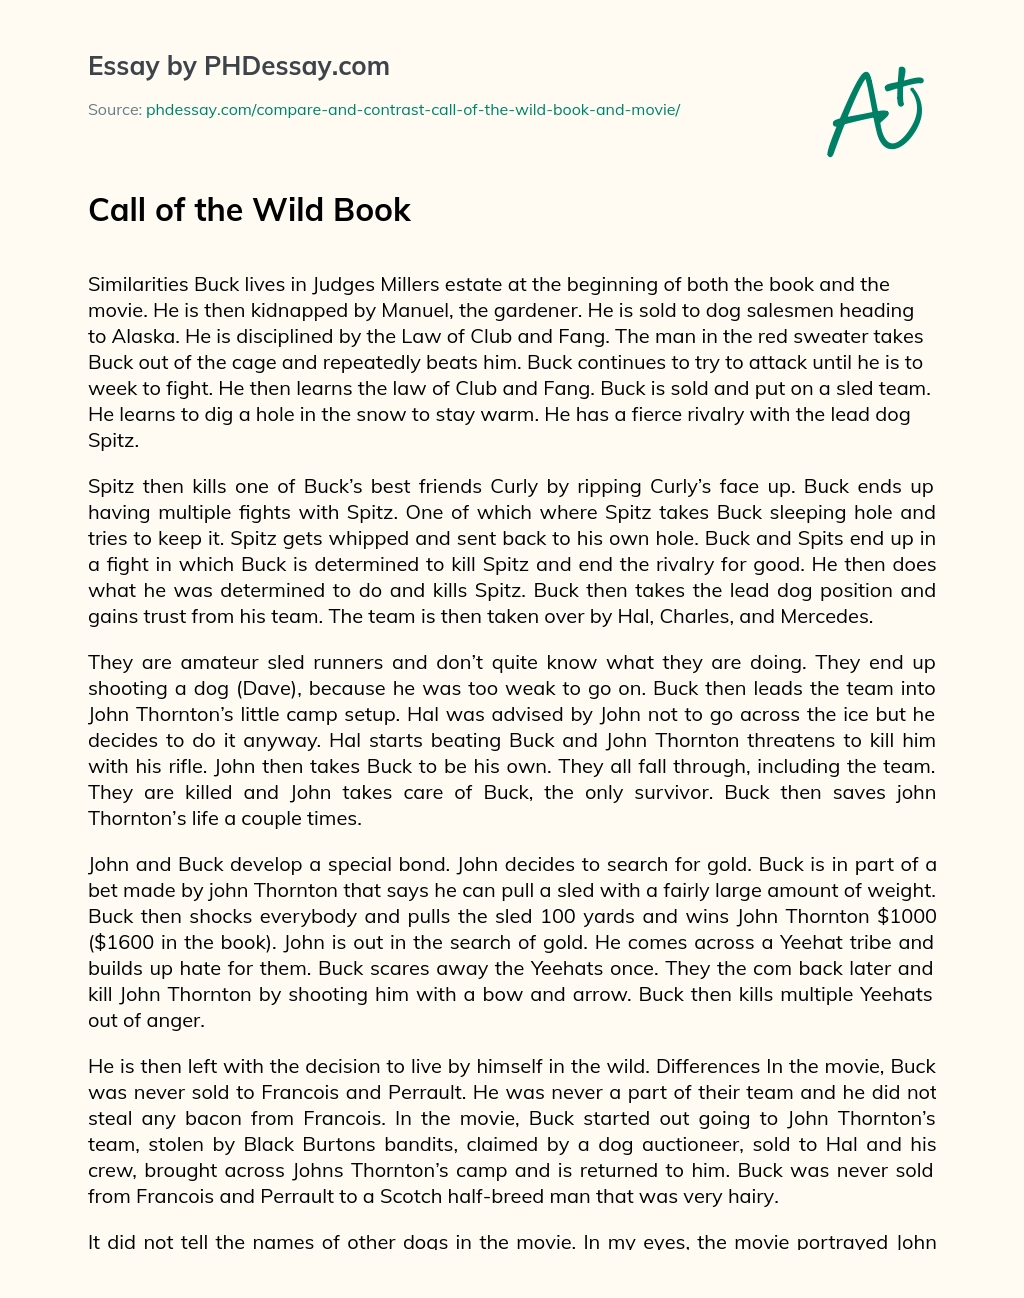 Call of the Wild Book essay